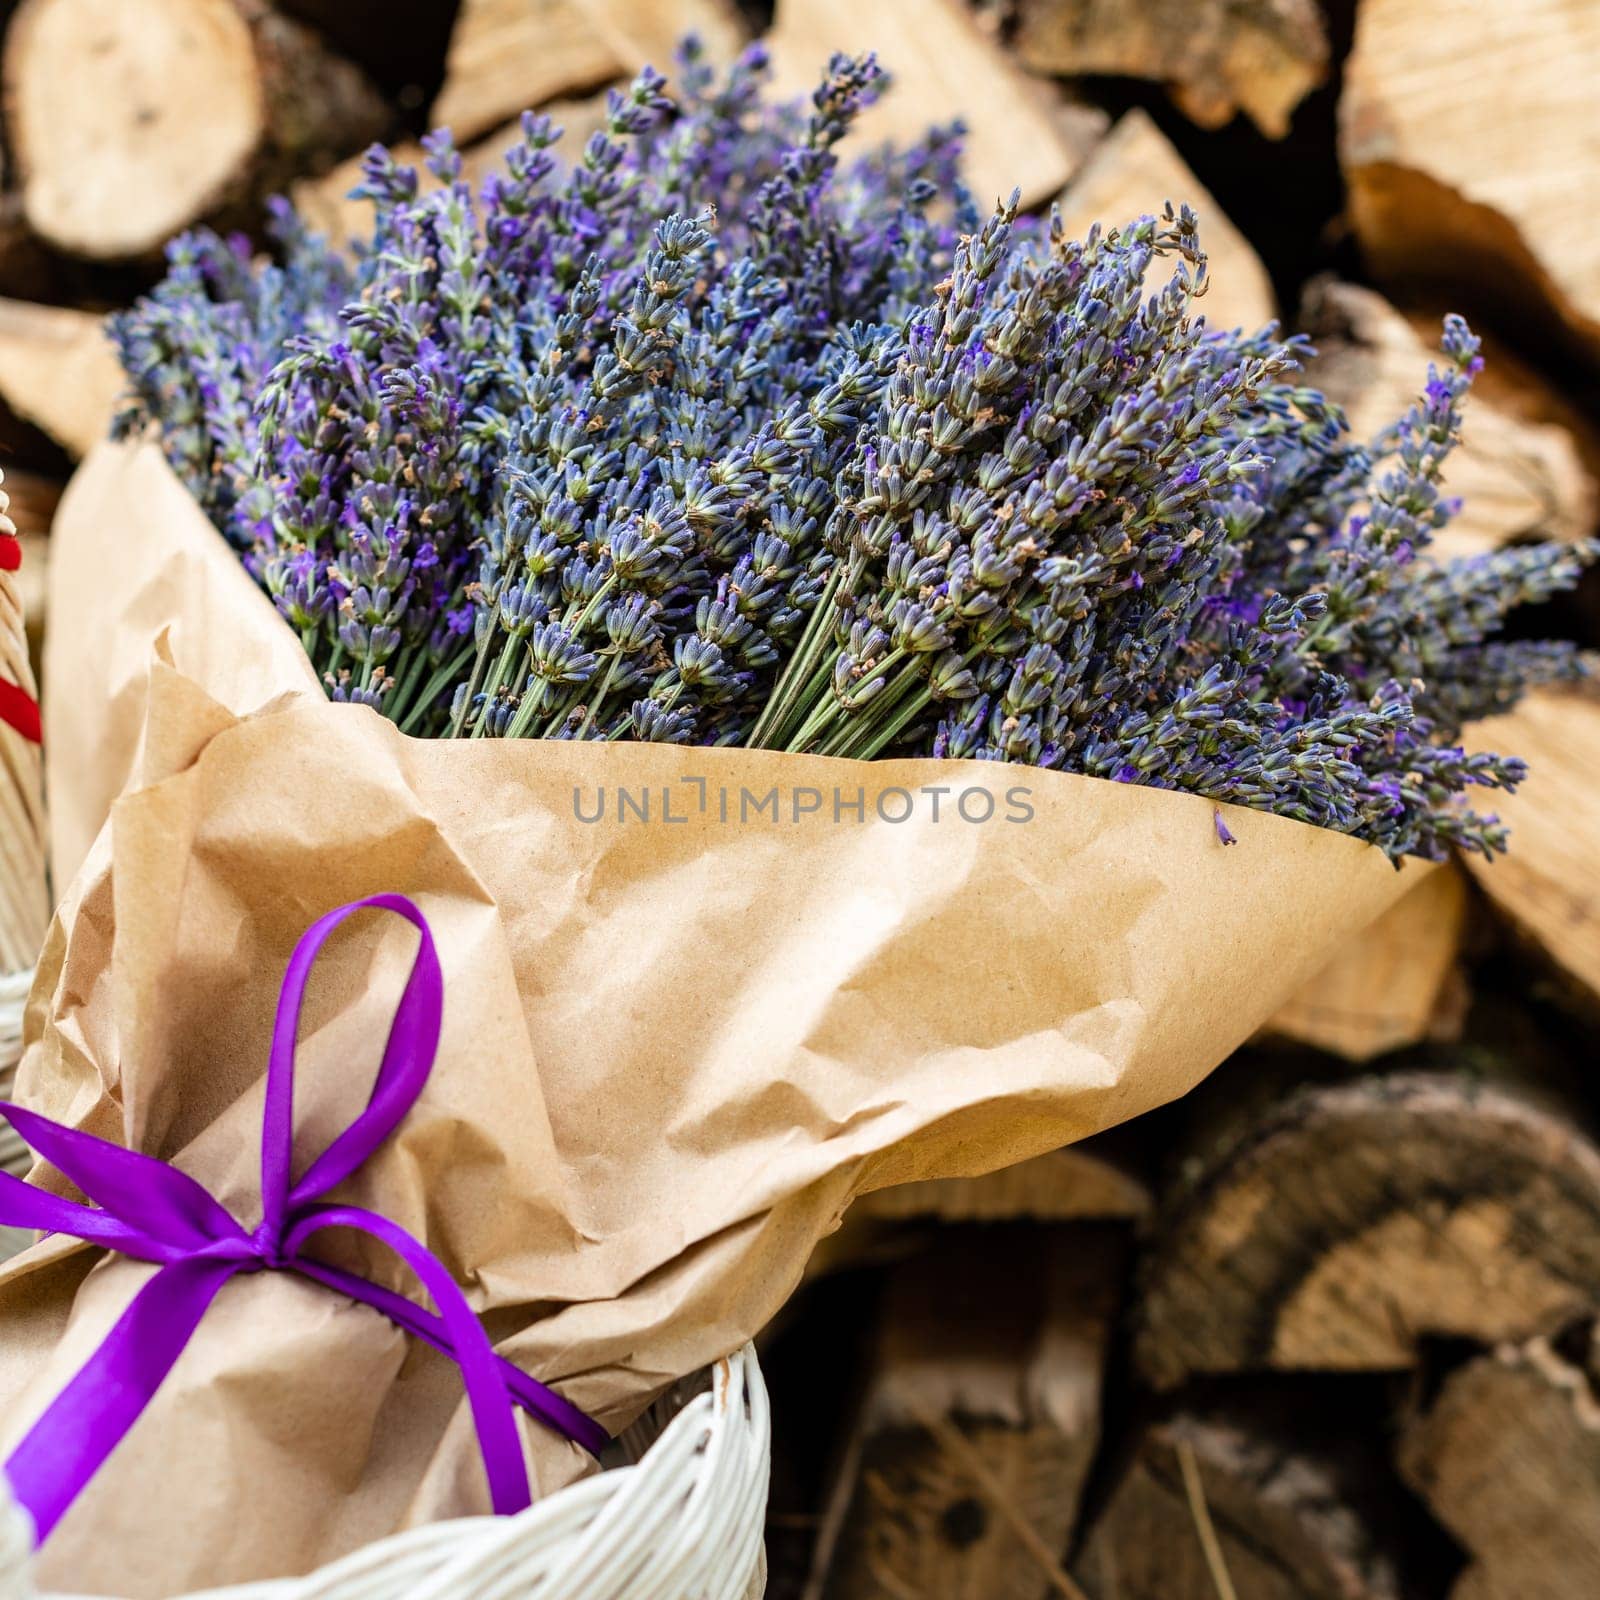 A lush and large bouquet of lavender wrapped in paper on a background of firewood by Niko_Cingaryuk